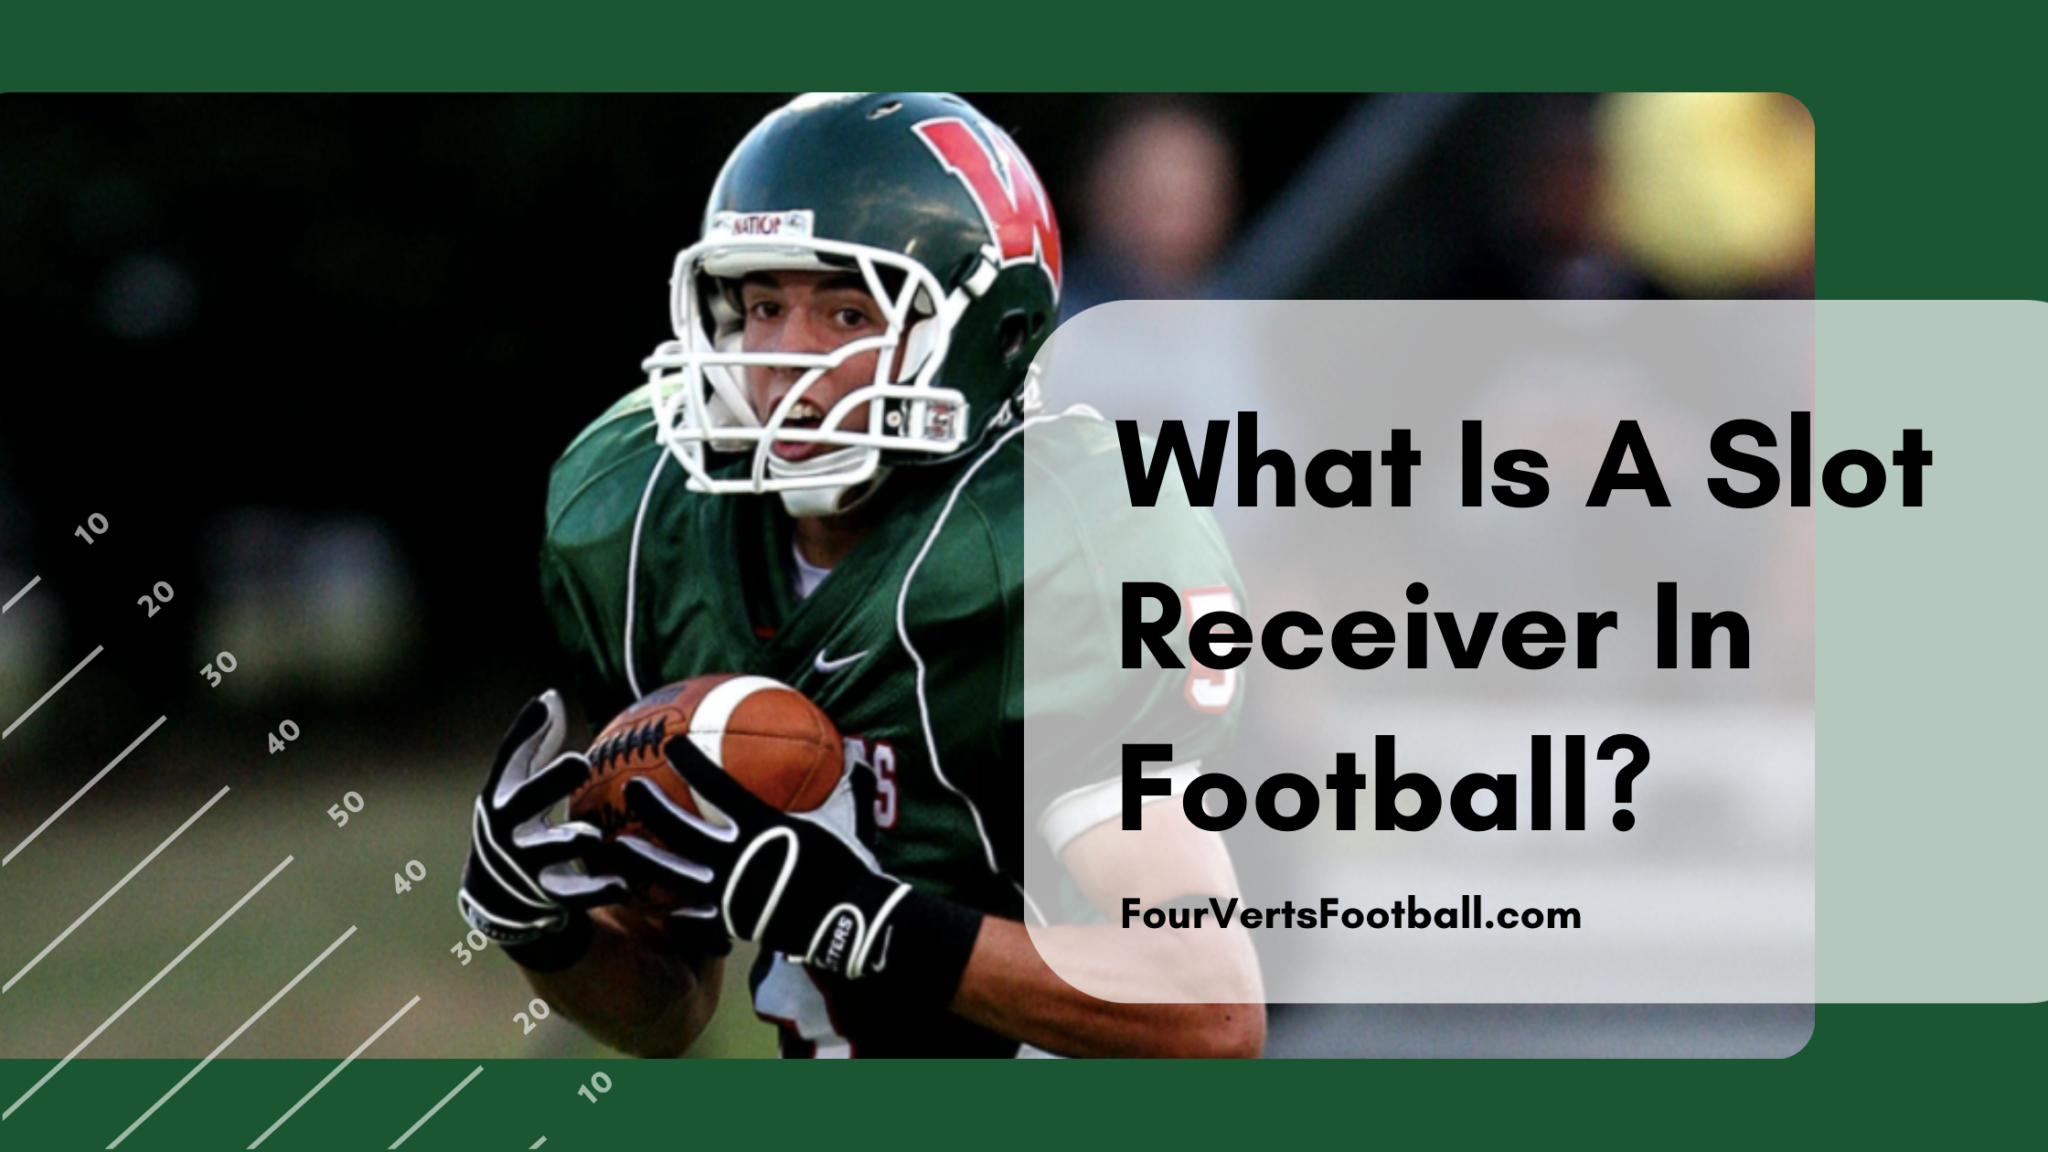 What Is A Slot Receiver - Football Terminology - Four Verts Football